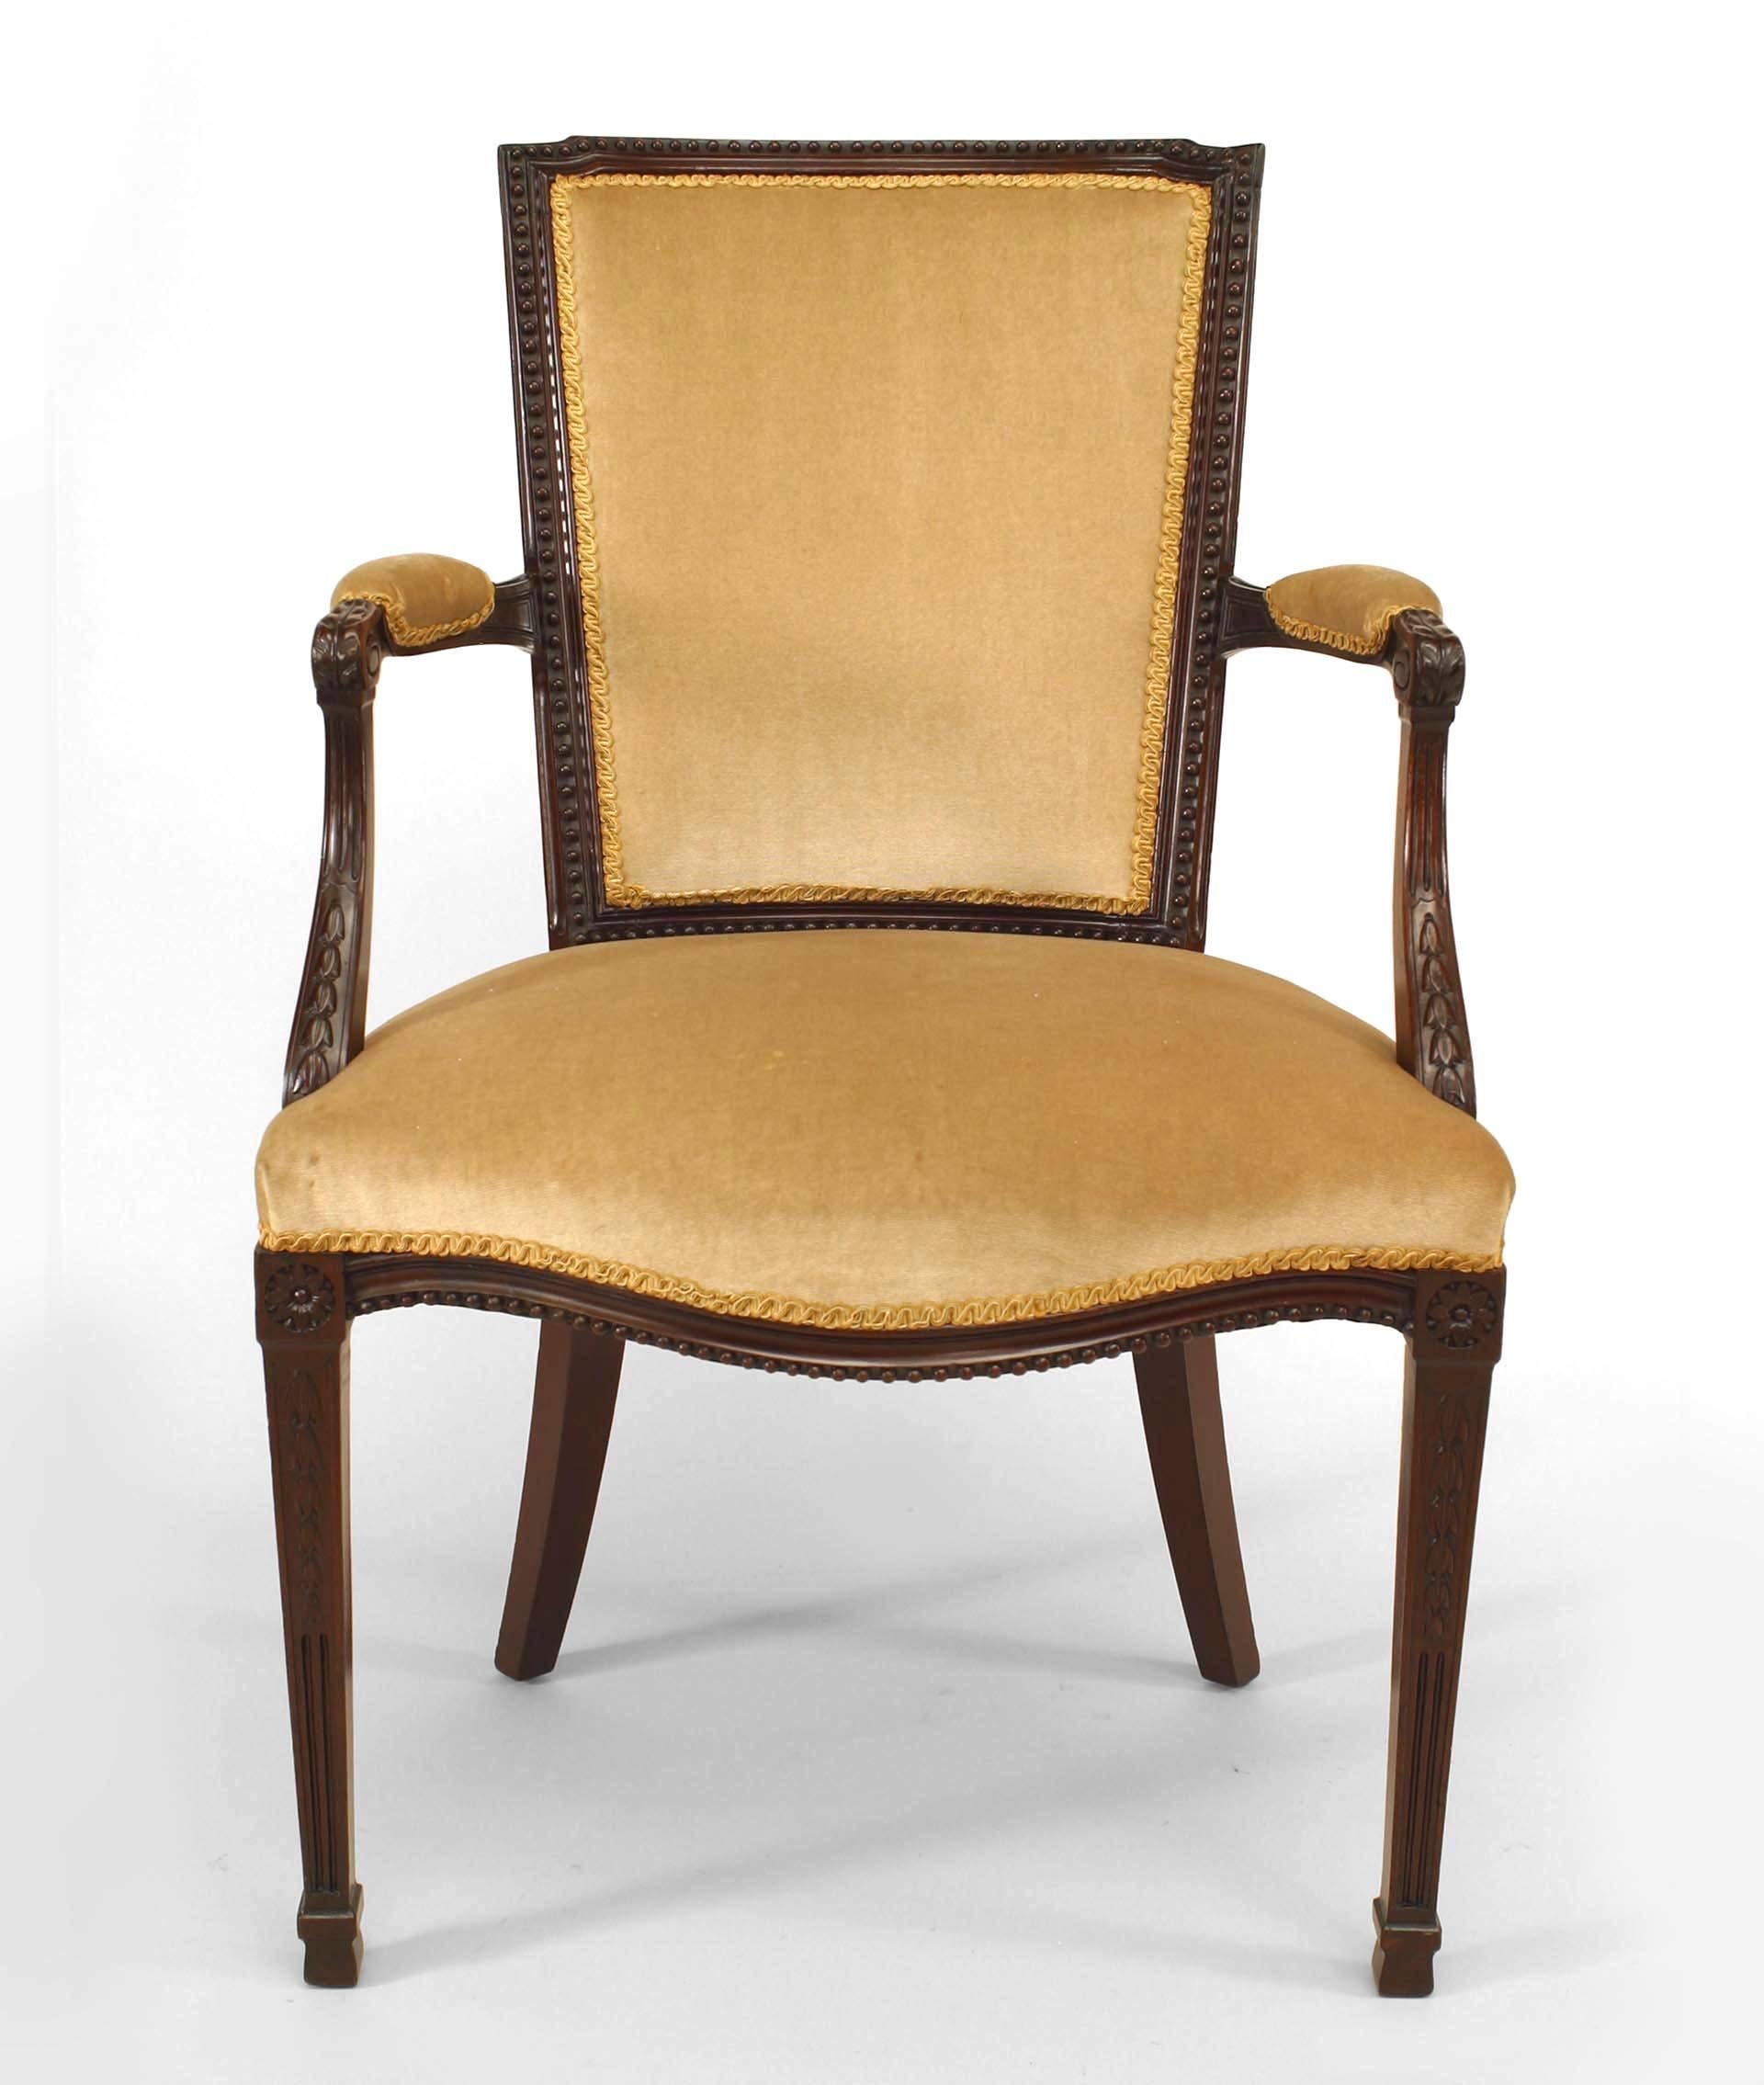 Set of eight English Adam style dining chairs of possible nineteenth century Dutch origin. The chairs are composed of mahogany with squared beige silk upholstered backs and seats above fluted legs.